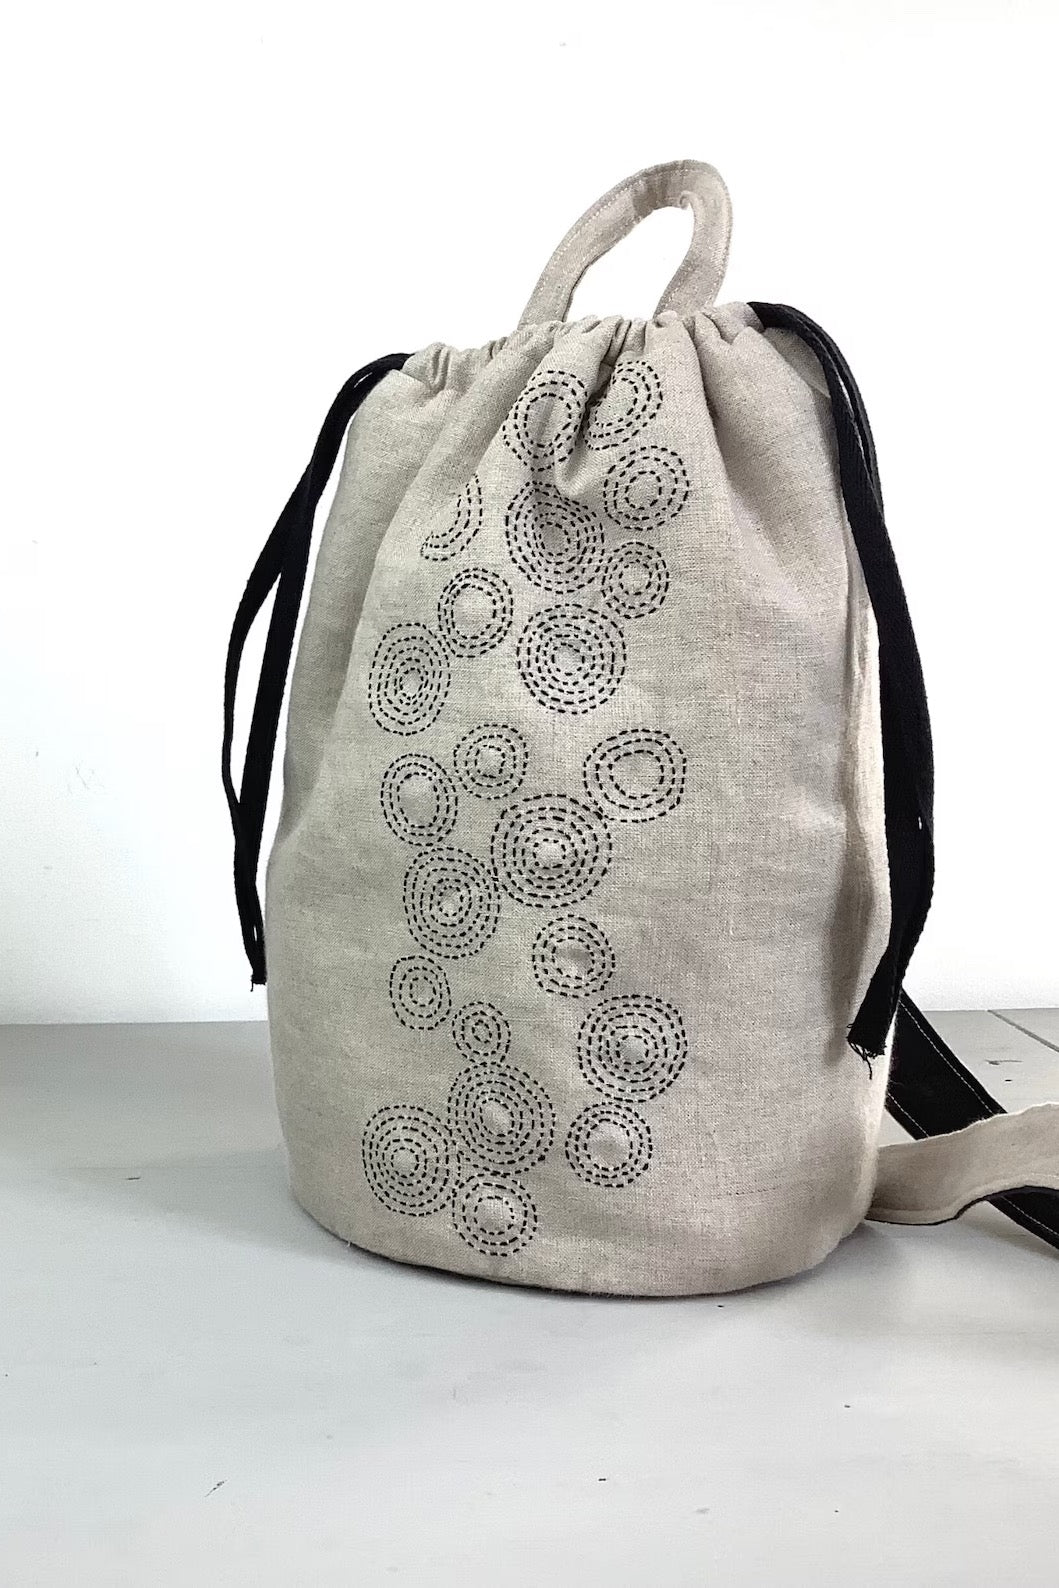 Photo showing the Taru Maru Crossbody Duffle Bag sewing pattern from Lasenby on The Fold Line. A duffle bag pattern made in canvas, linen, quilting cotton, twill, duck, denim, fine tweed, and Tana lawn fabrics, featuring a sashiko hand embroidery design, 